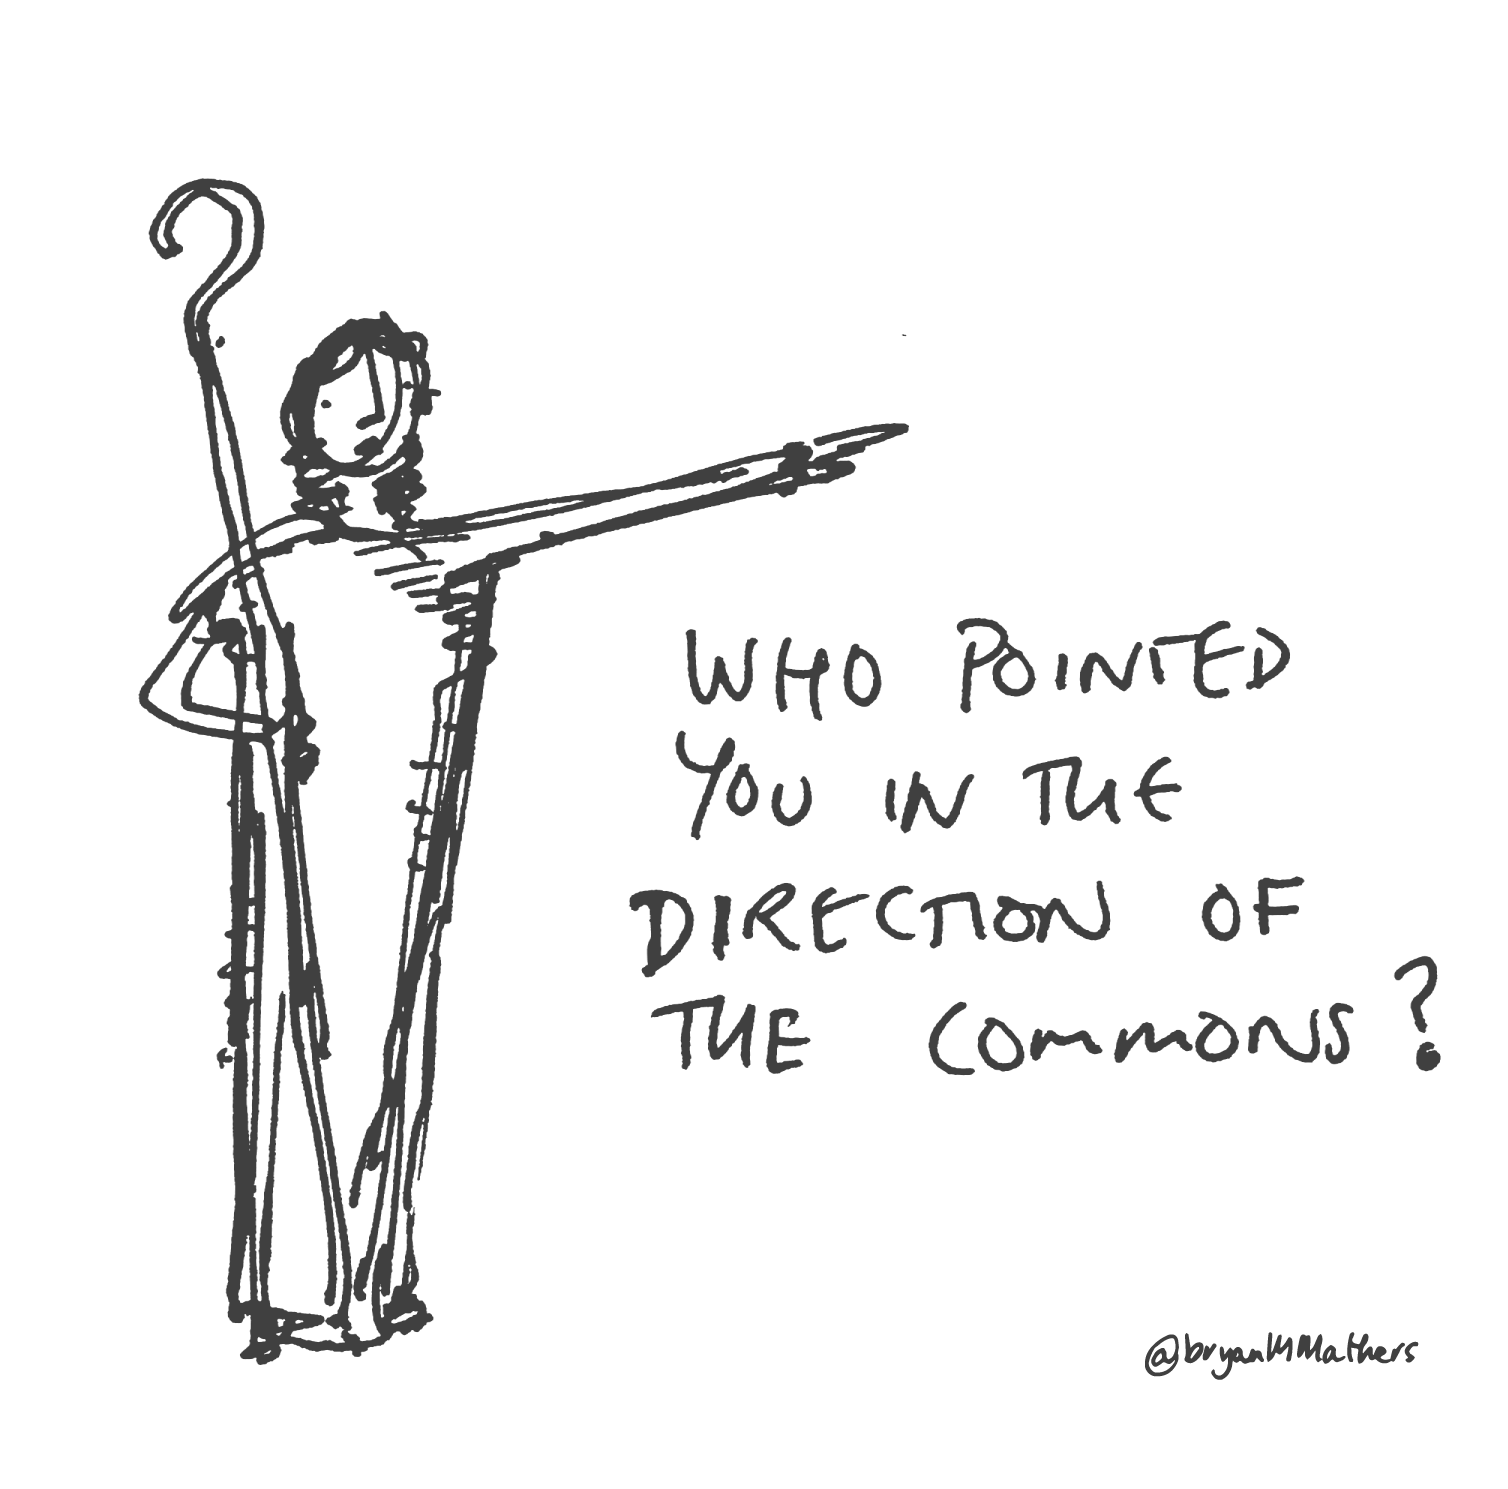 Who pointed you towards the commons